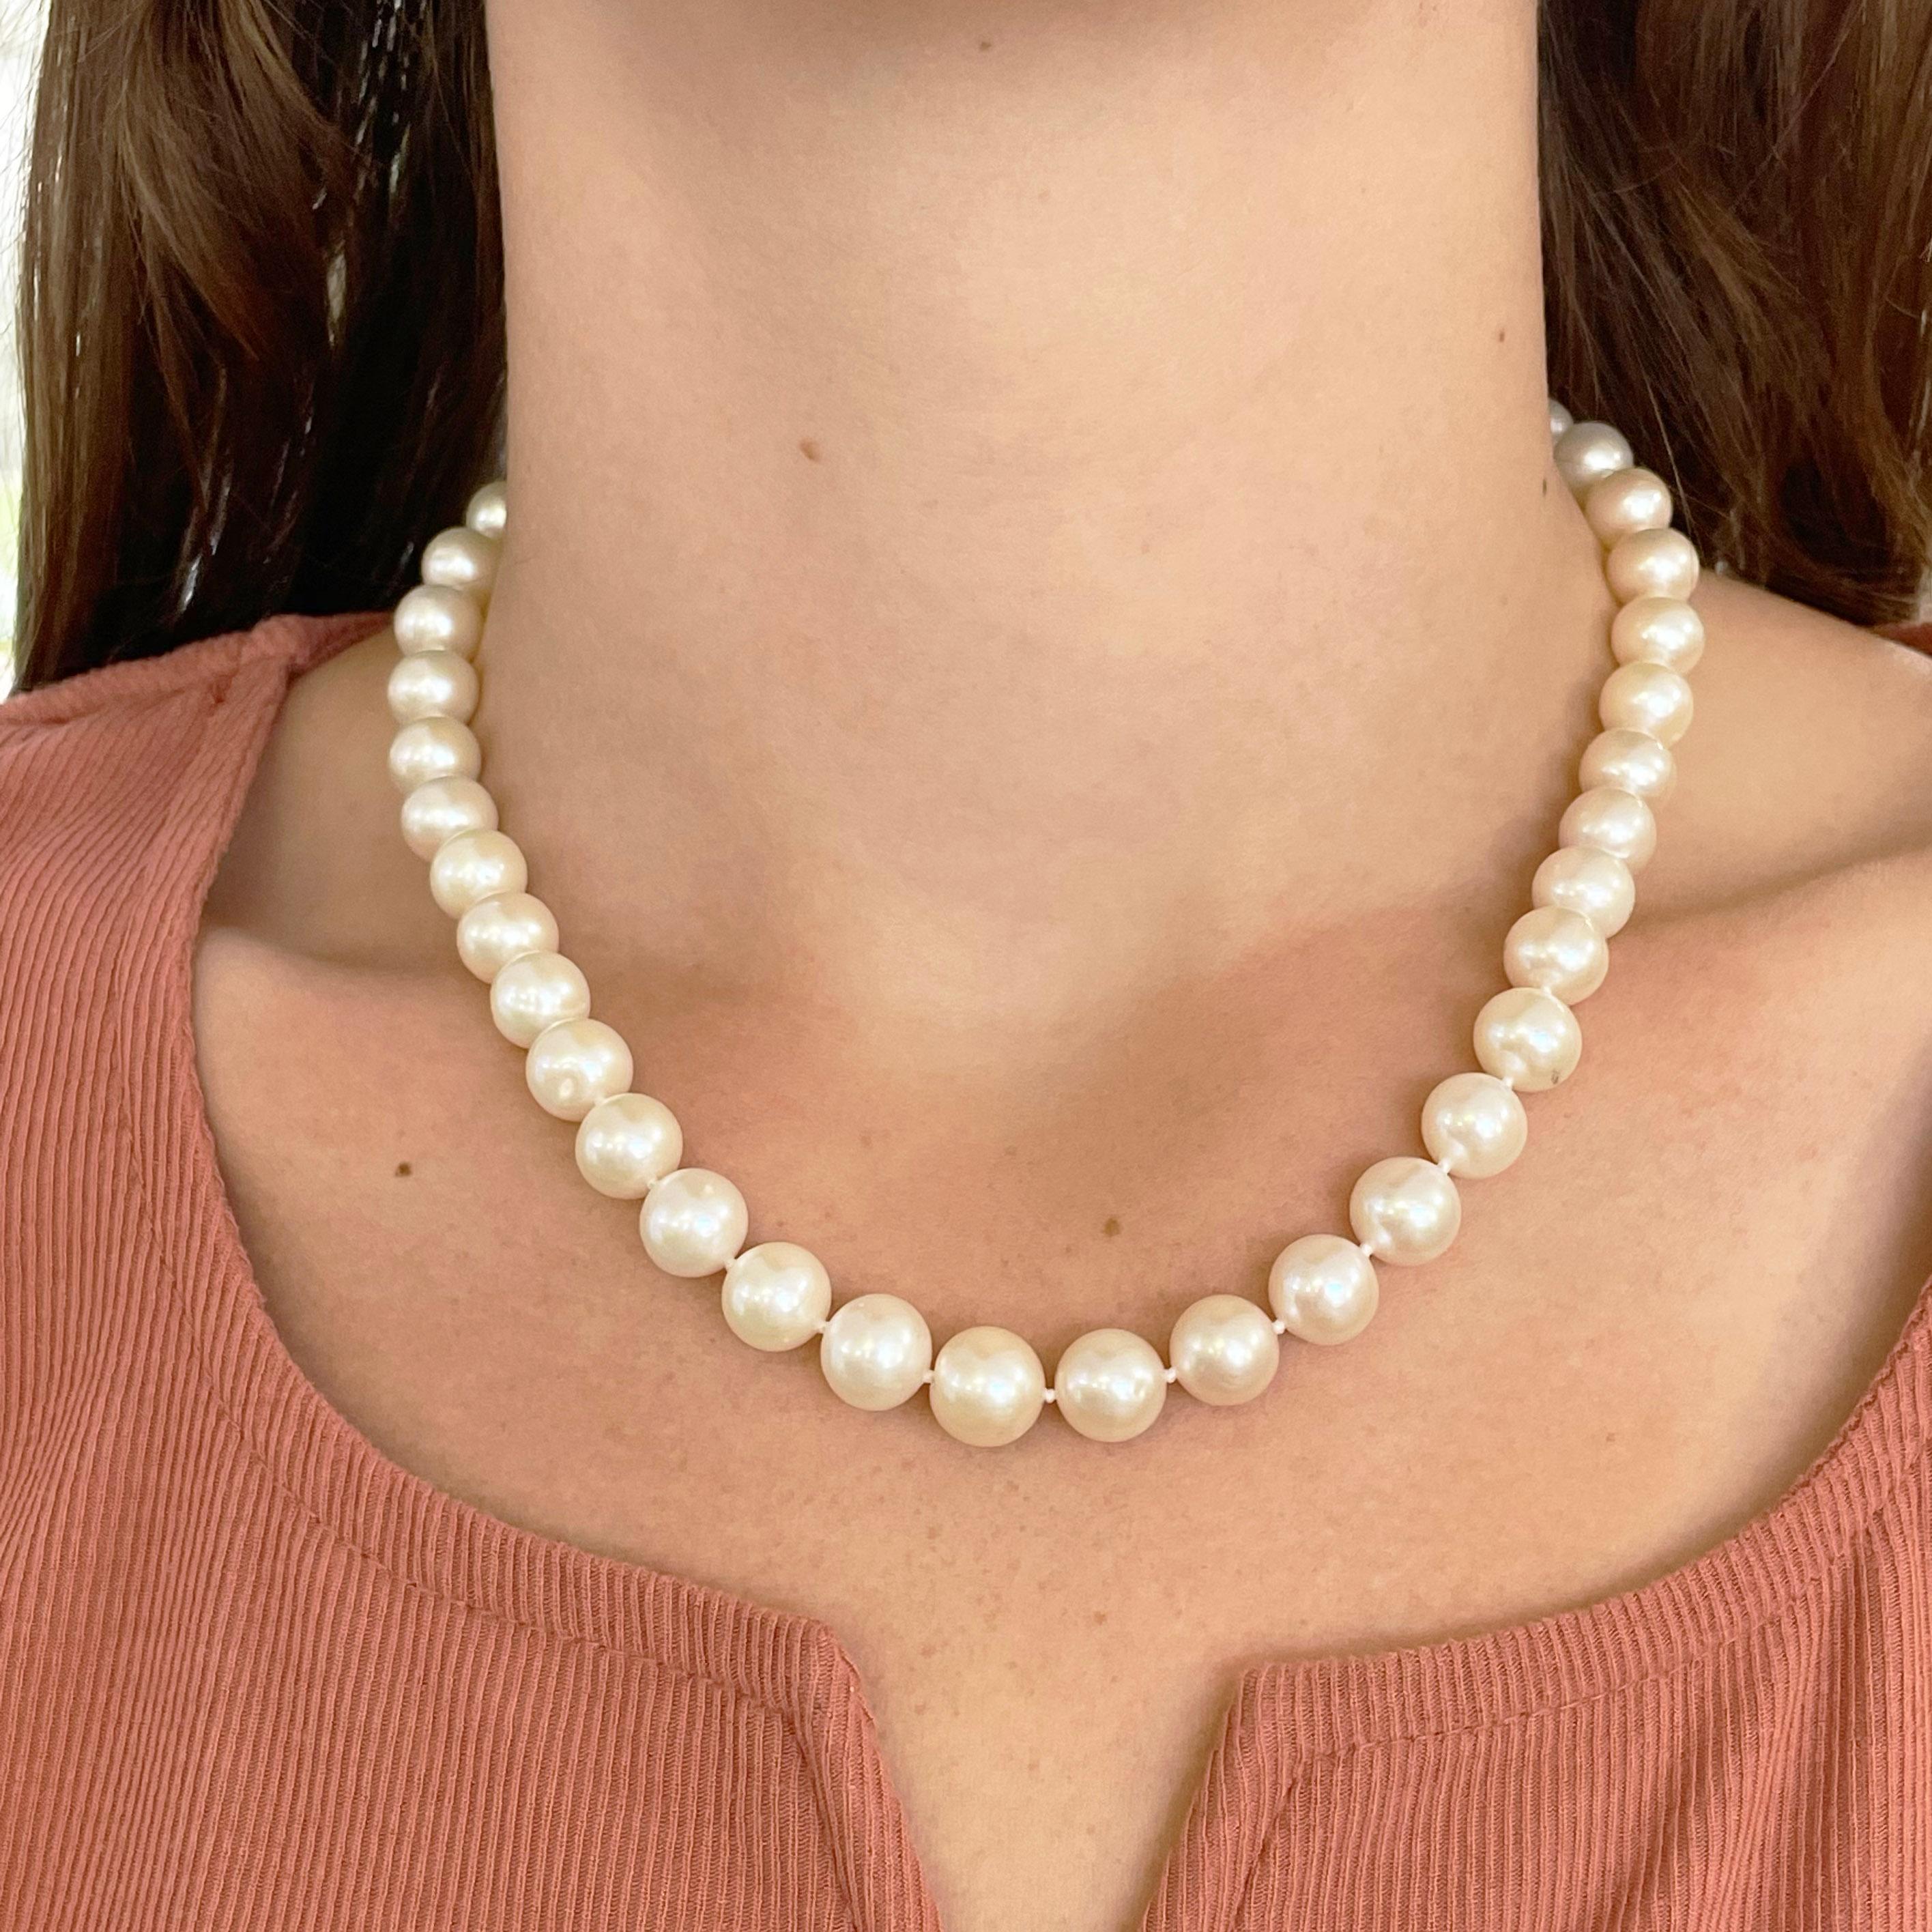 Every girl needs a strand of pearls before her jewelry collection is complete. These 18 inches of freshwater pearls are a great choice! And the well matched pearls with beautiful hints of pink and tan and have a nice luster makes them even more